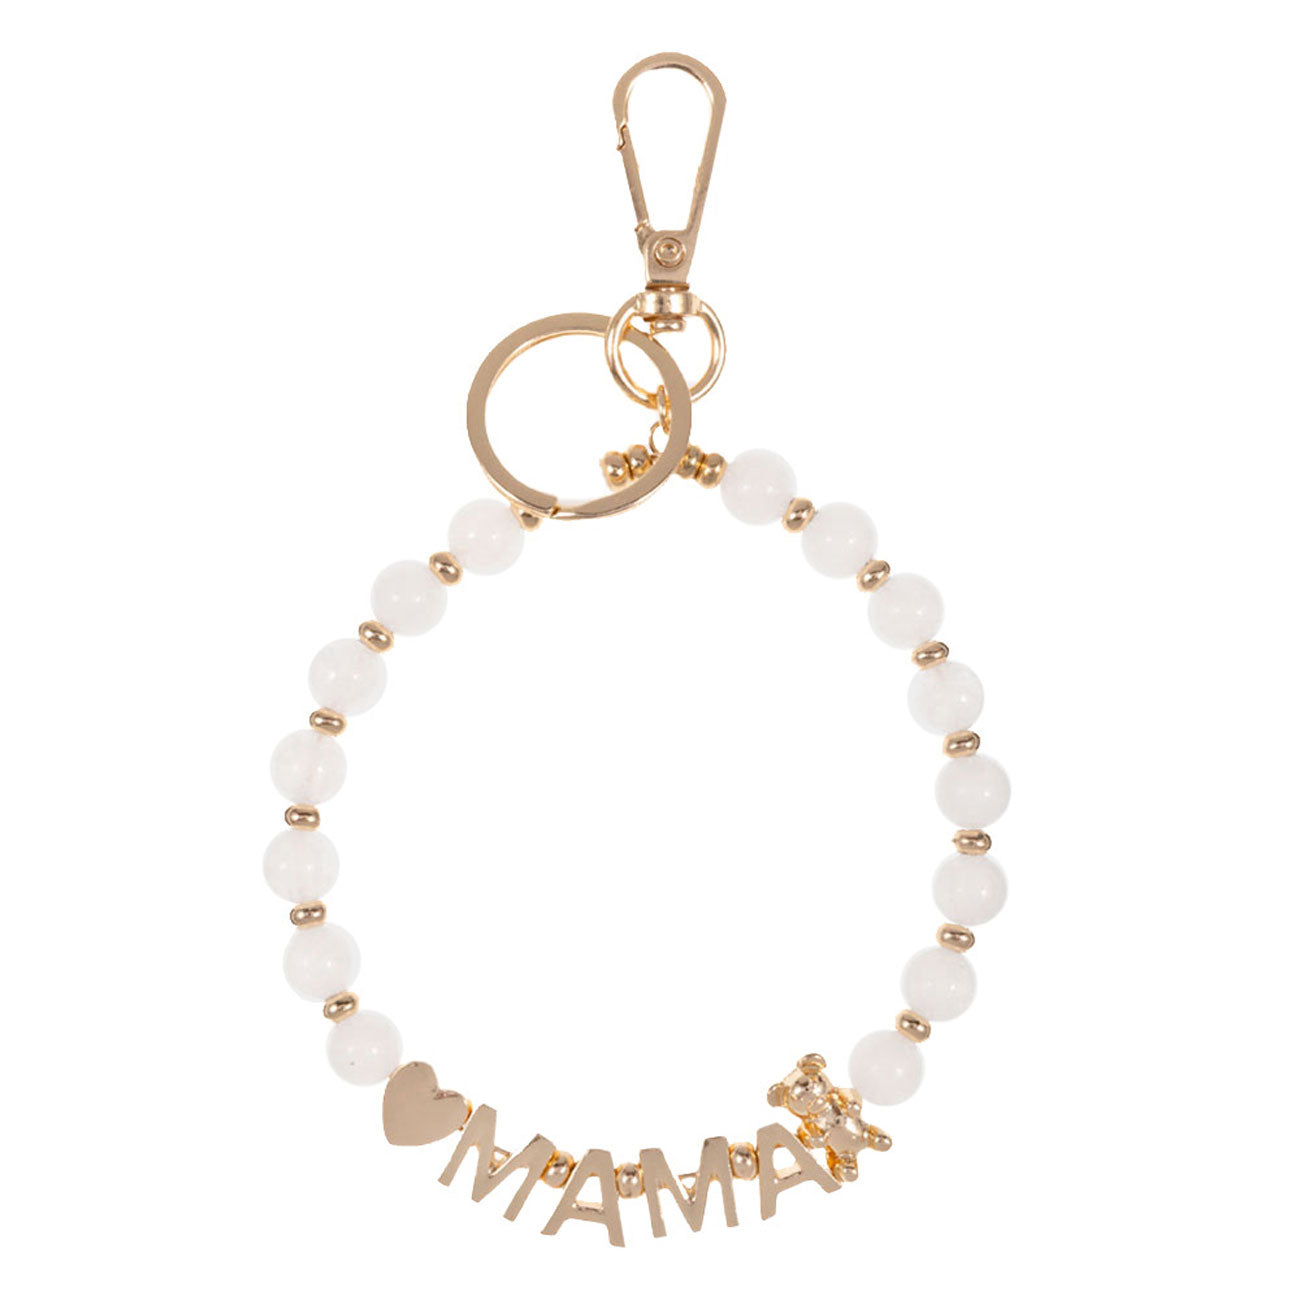 White Mama Message Heart Bear Pointed Semi Precious Key Chain Bracelet, Make your mom feel special with this gorgeous Bracelet gift! Her heart will swell with joy! Designed to add a gorgeous stylish glow to any outfit. Show mom how much she is appreciated & loved. This piece is versatile and goes with practically anything!